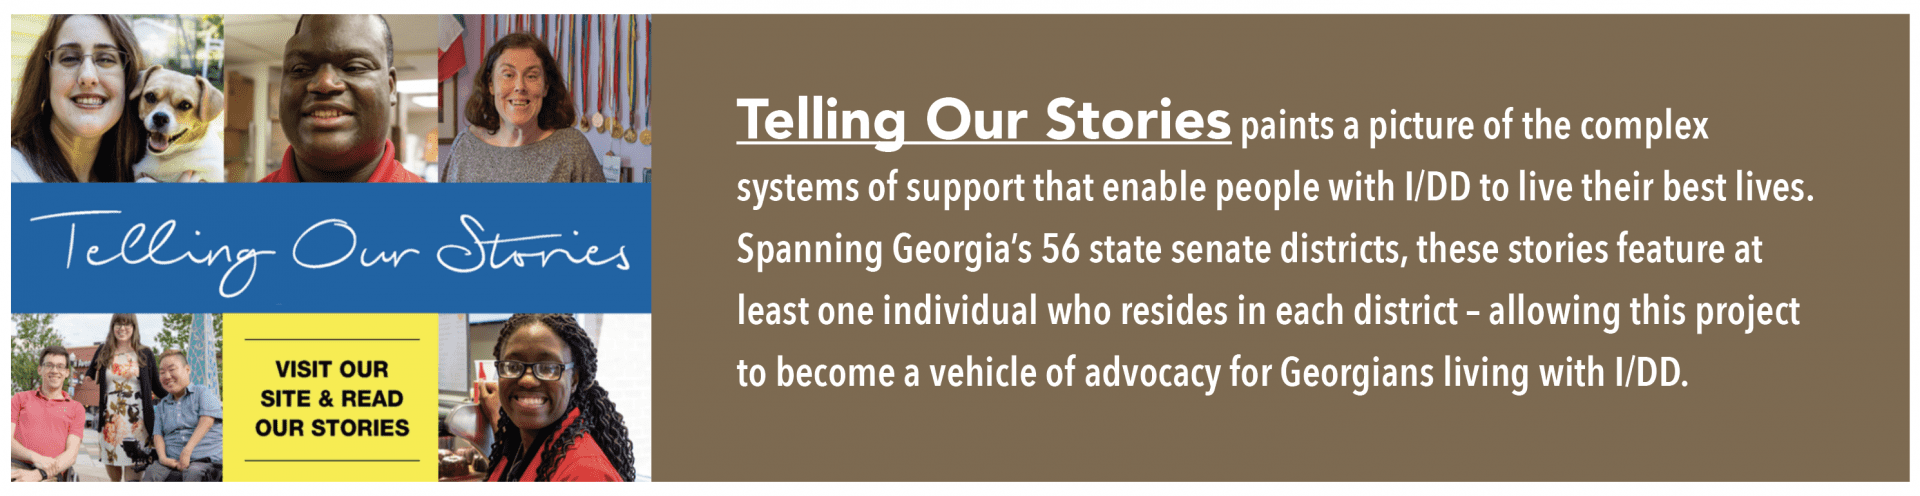 Link to Telling Our Stories Website